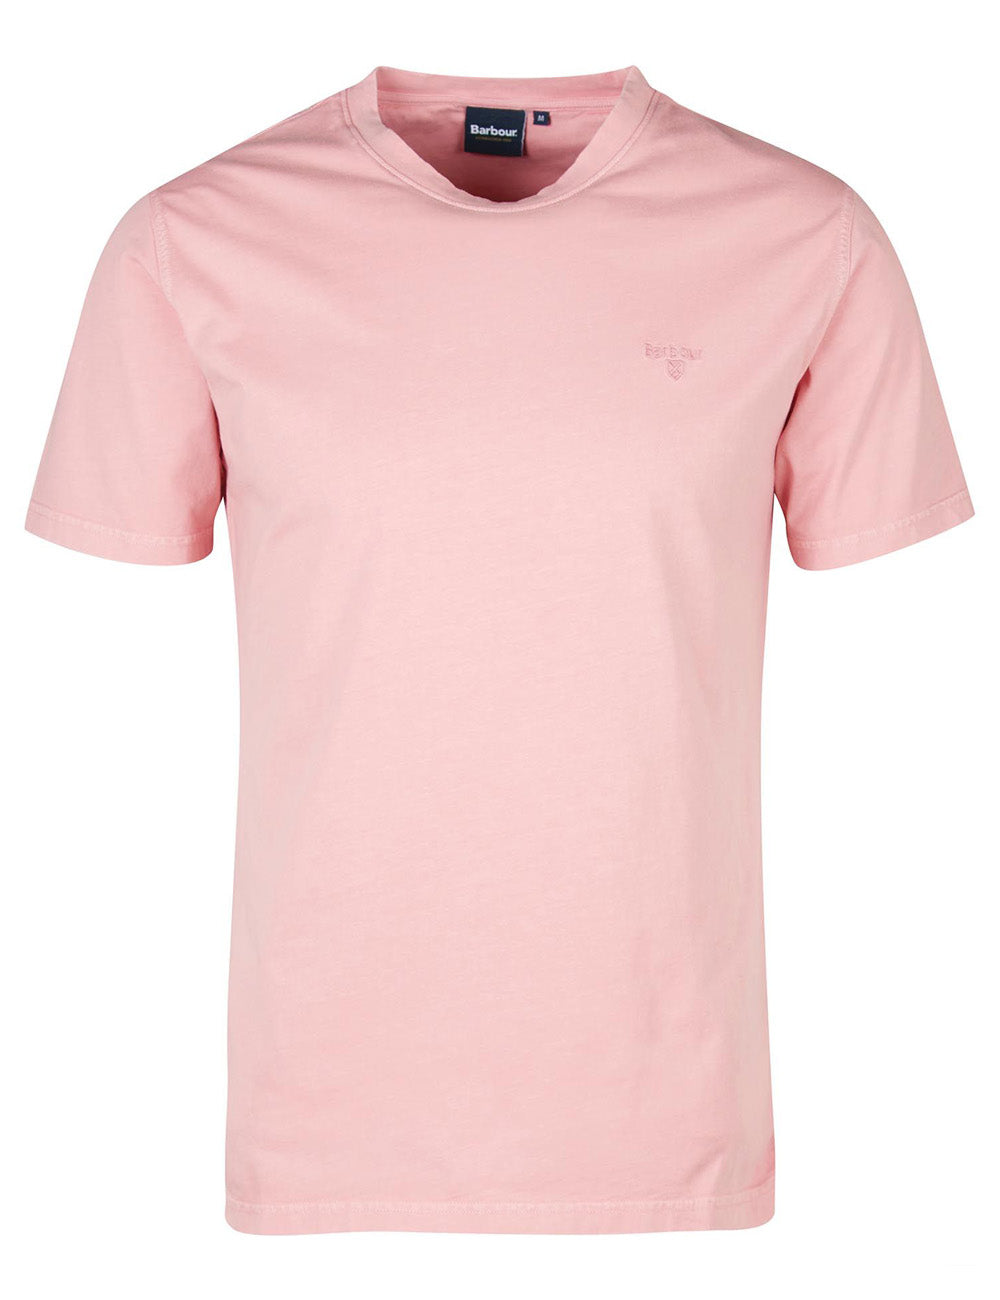 Barbour's Garment Dyed T-Shirt in Pink Salt on a white background